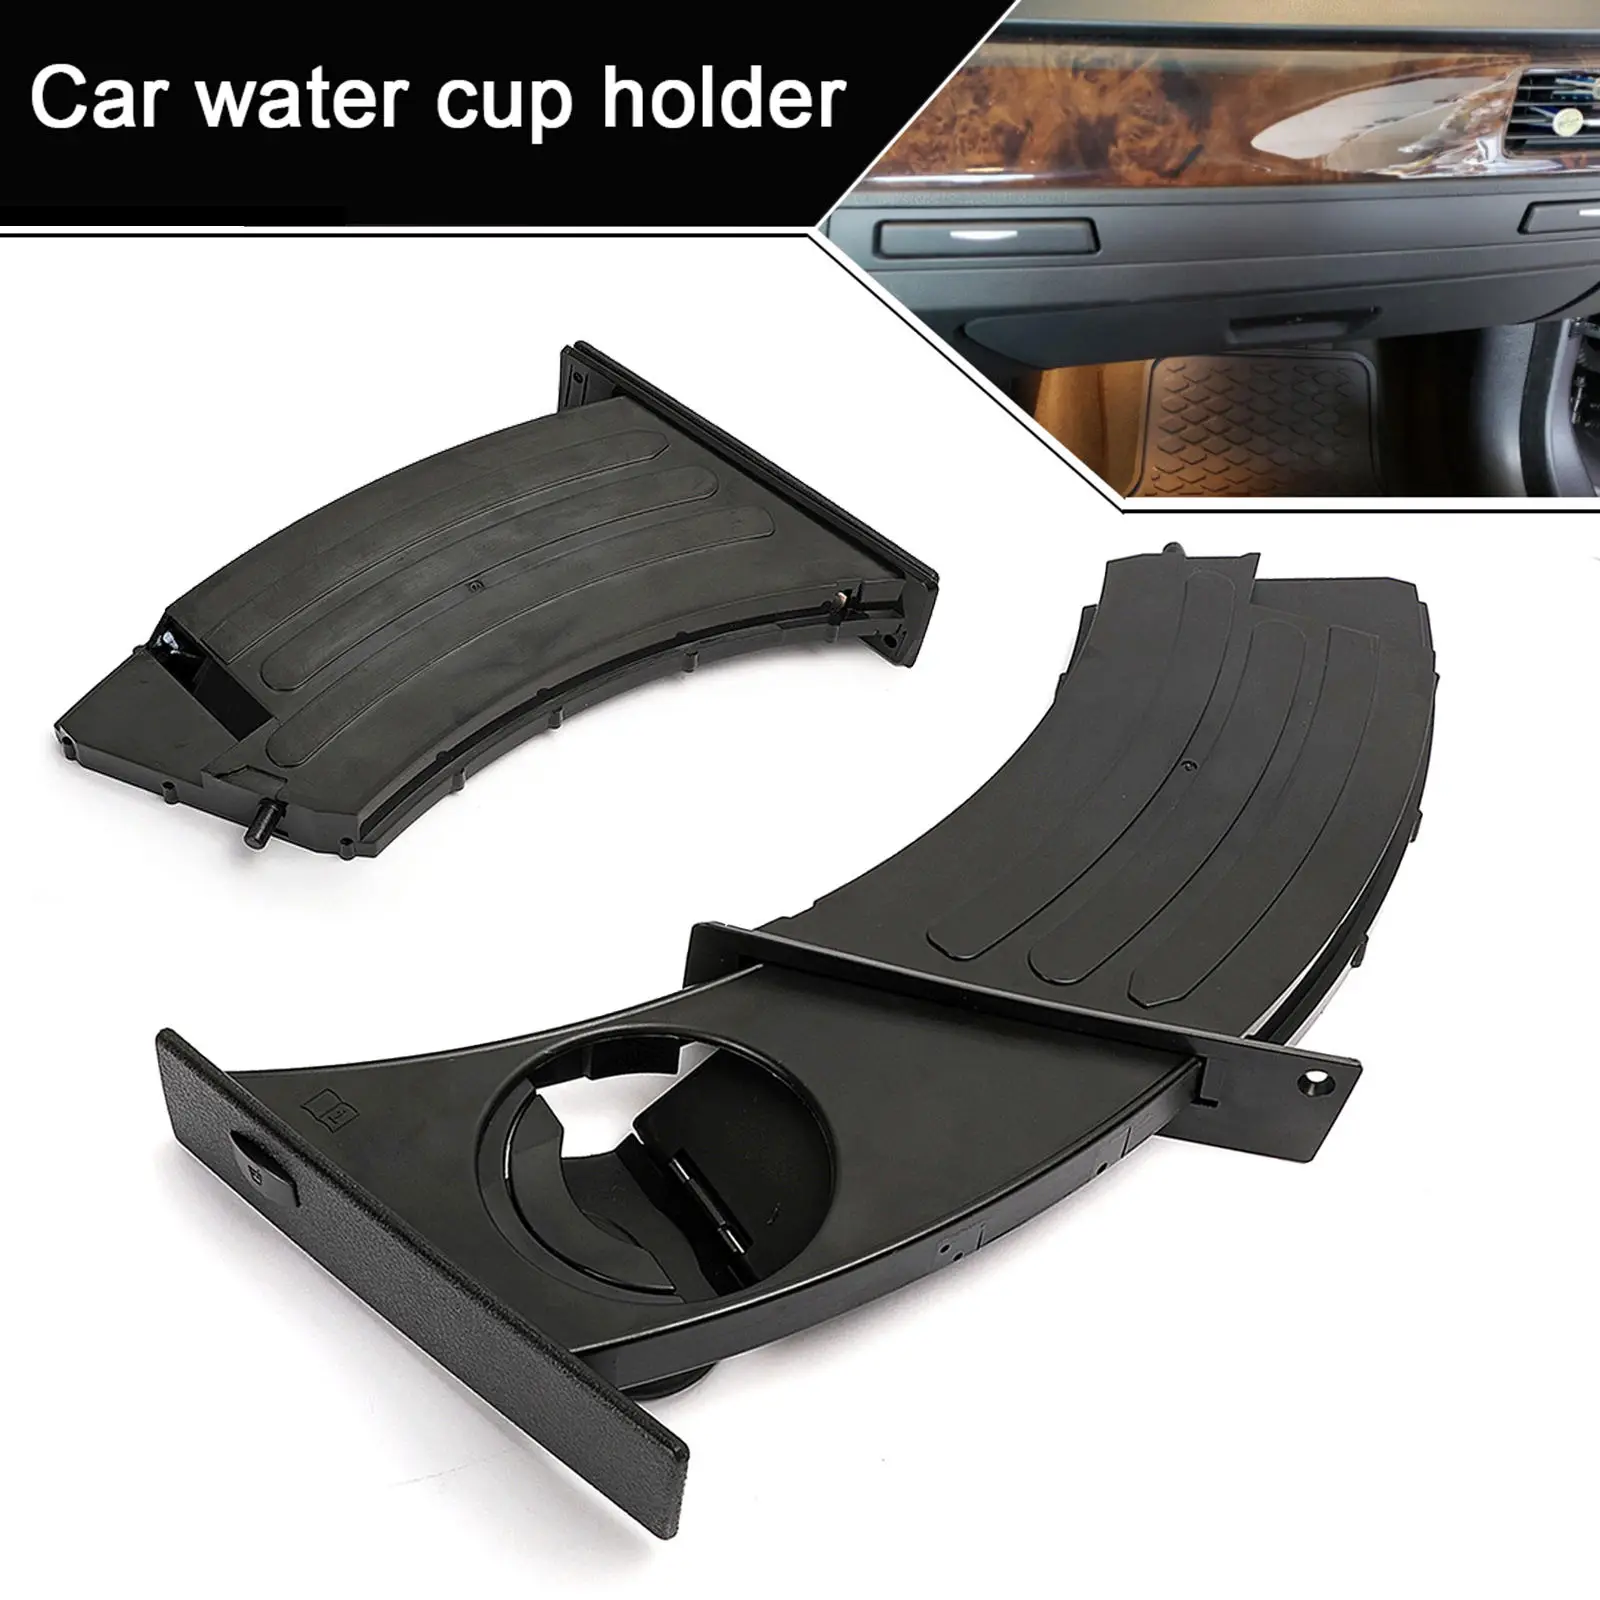 Replacement Front Driver Side  Board Inner Cup Holder Fits for BMW 525i E60 530i 528i 535i 545i M5 xDrive